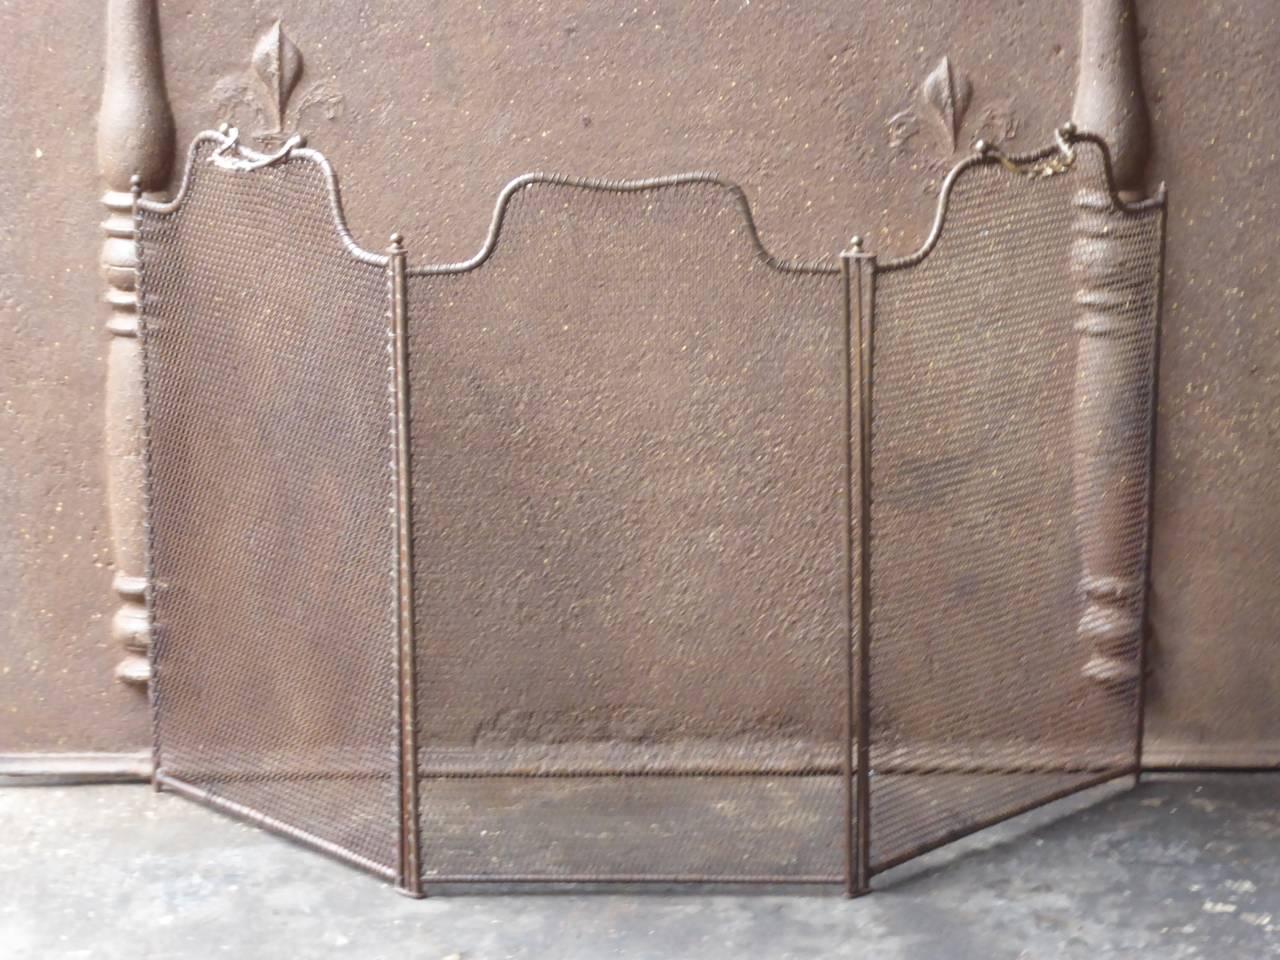 19th century French fireplace screen made of brass, iron and iron mesh.

We have a unique and specialized collection of antique and used fireplace accessories consisting of more than 1000 listings at 1stdibs. Amongst others, we always have 300+